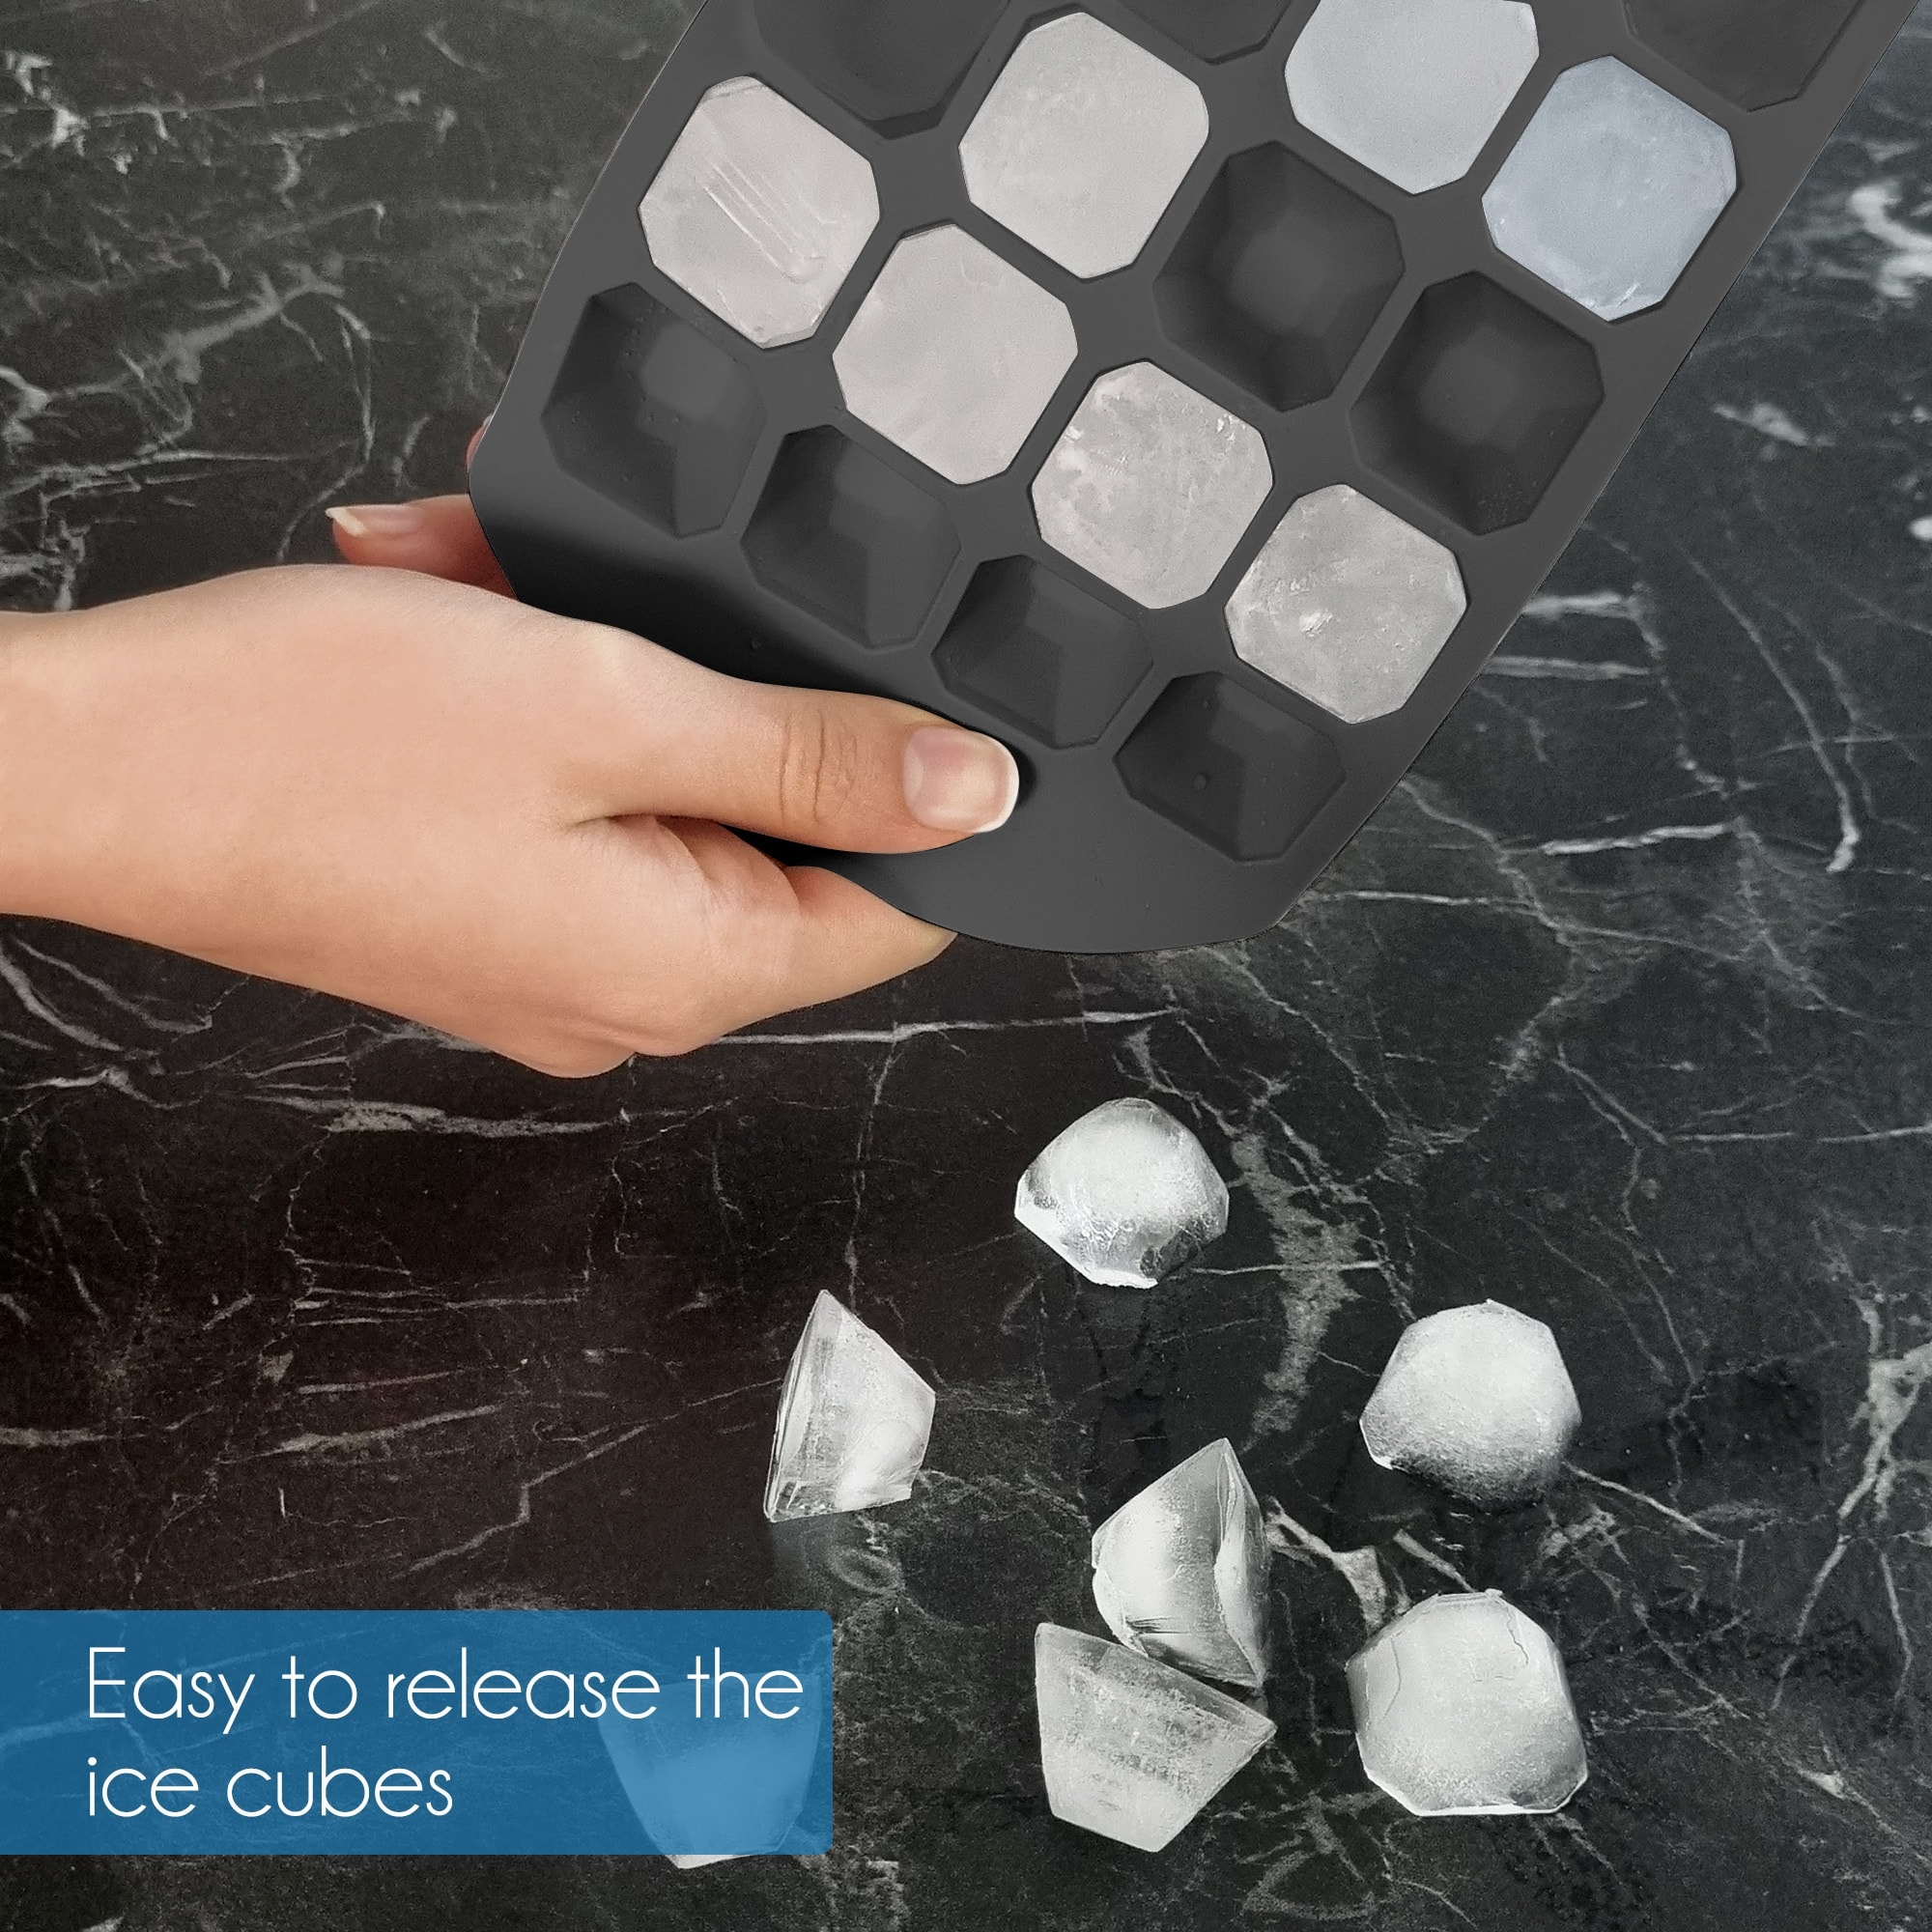  Ice Cube Trays Large Size Silicone Square Ice Cube Molds for  making 8 Giant Ice Cubes for Whiskey and Cocktails, Keep Drinks Chilled,  Reusable and BPA Free 2 Pack: Home 